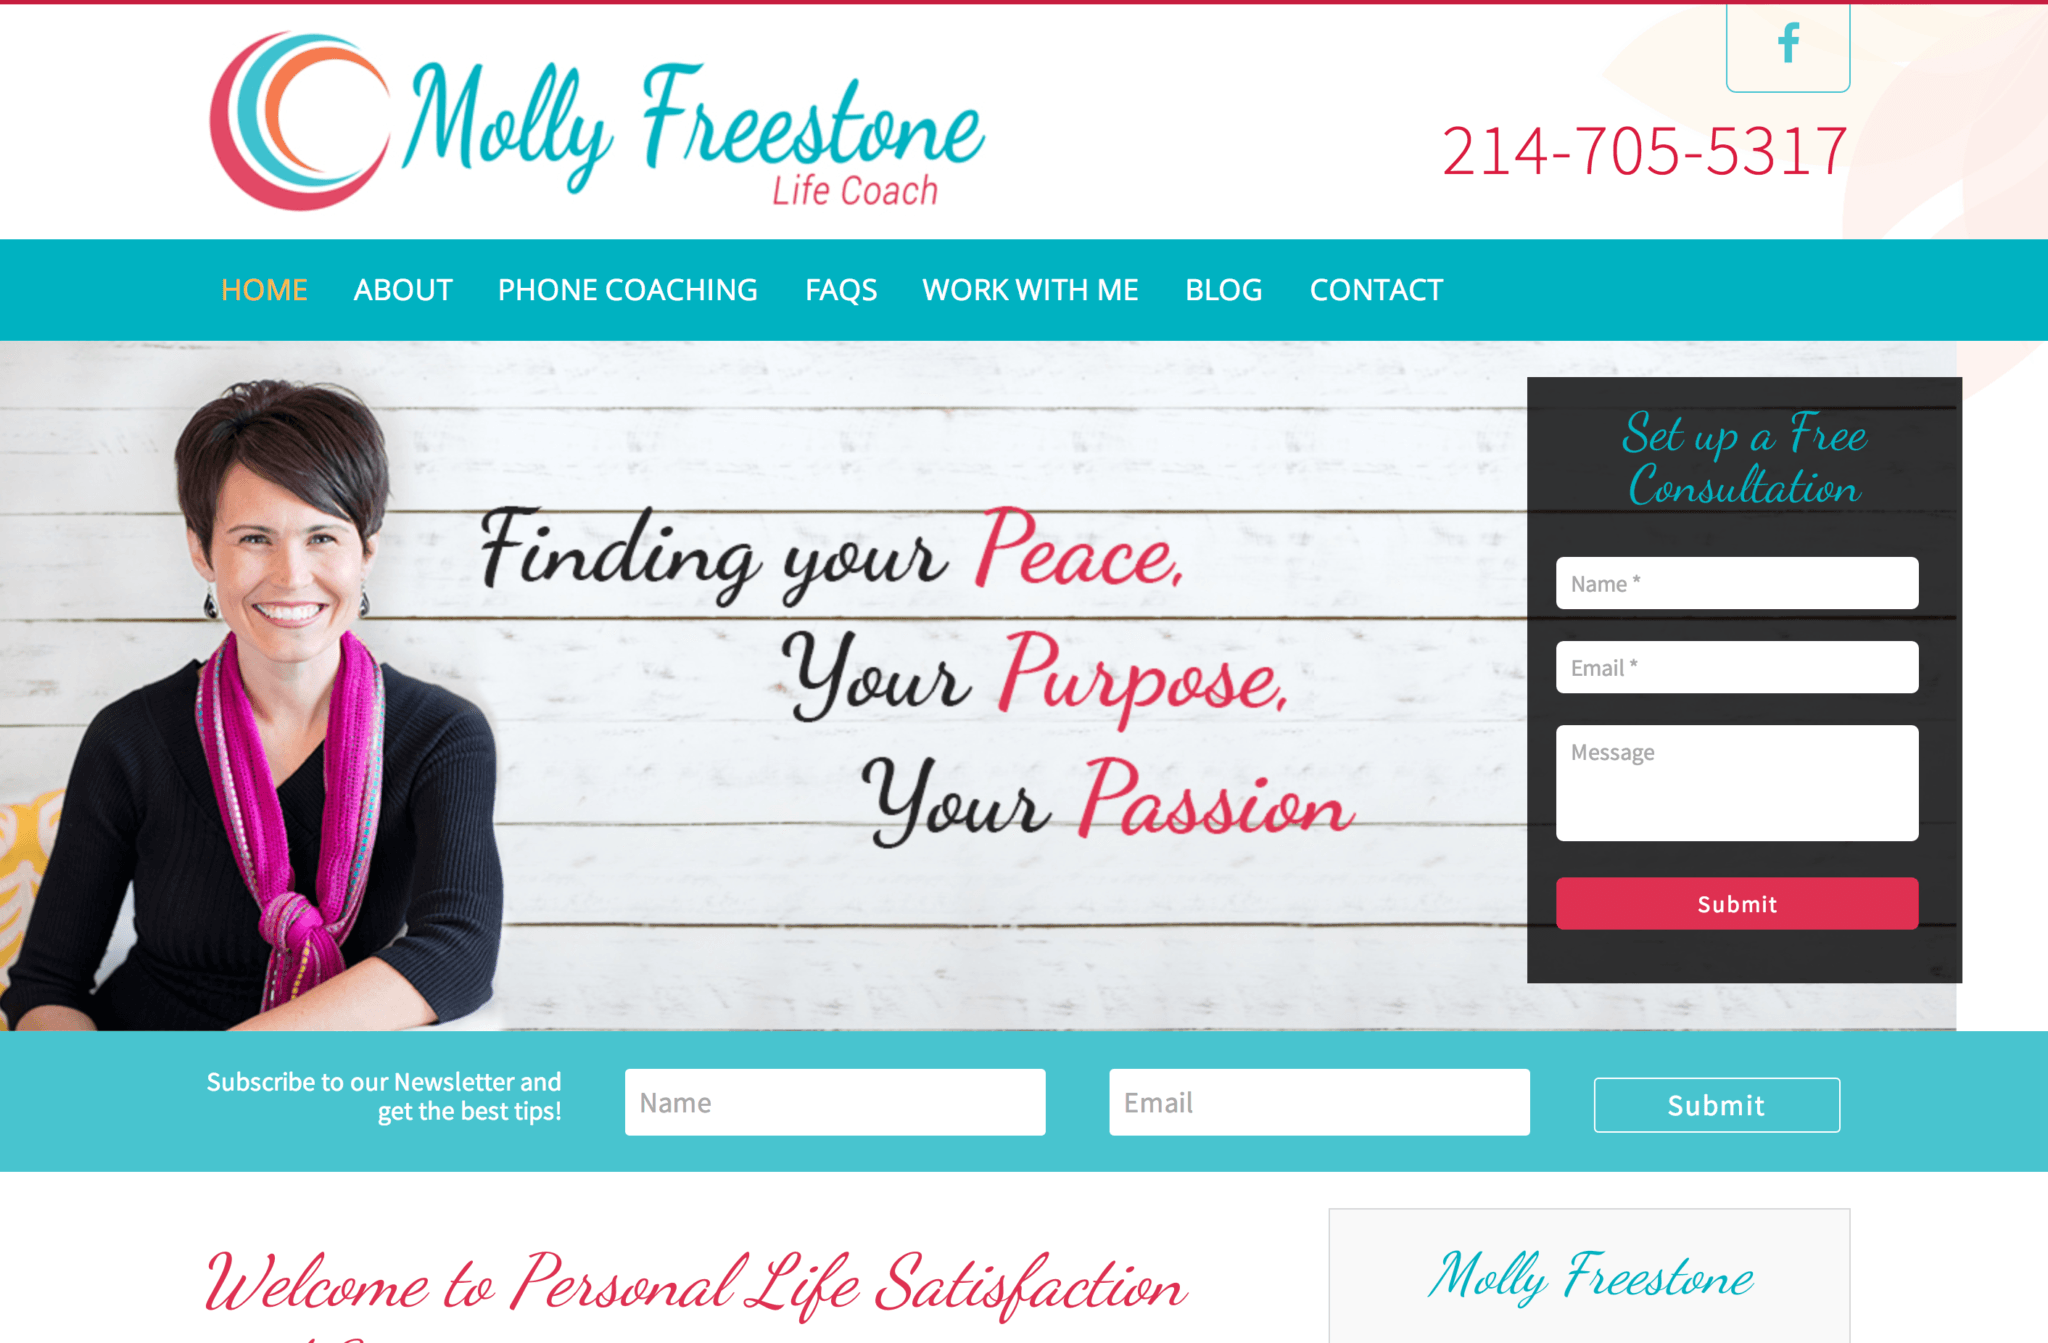 New Website Launched – Molly Freestone | Life Coach